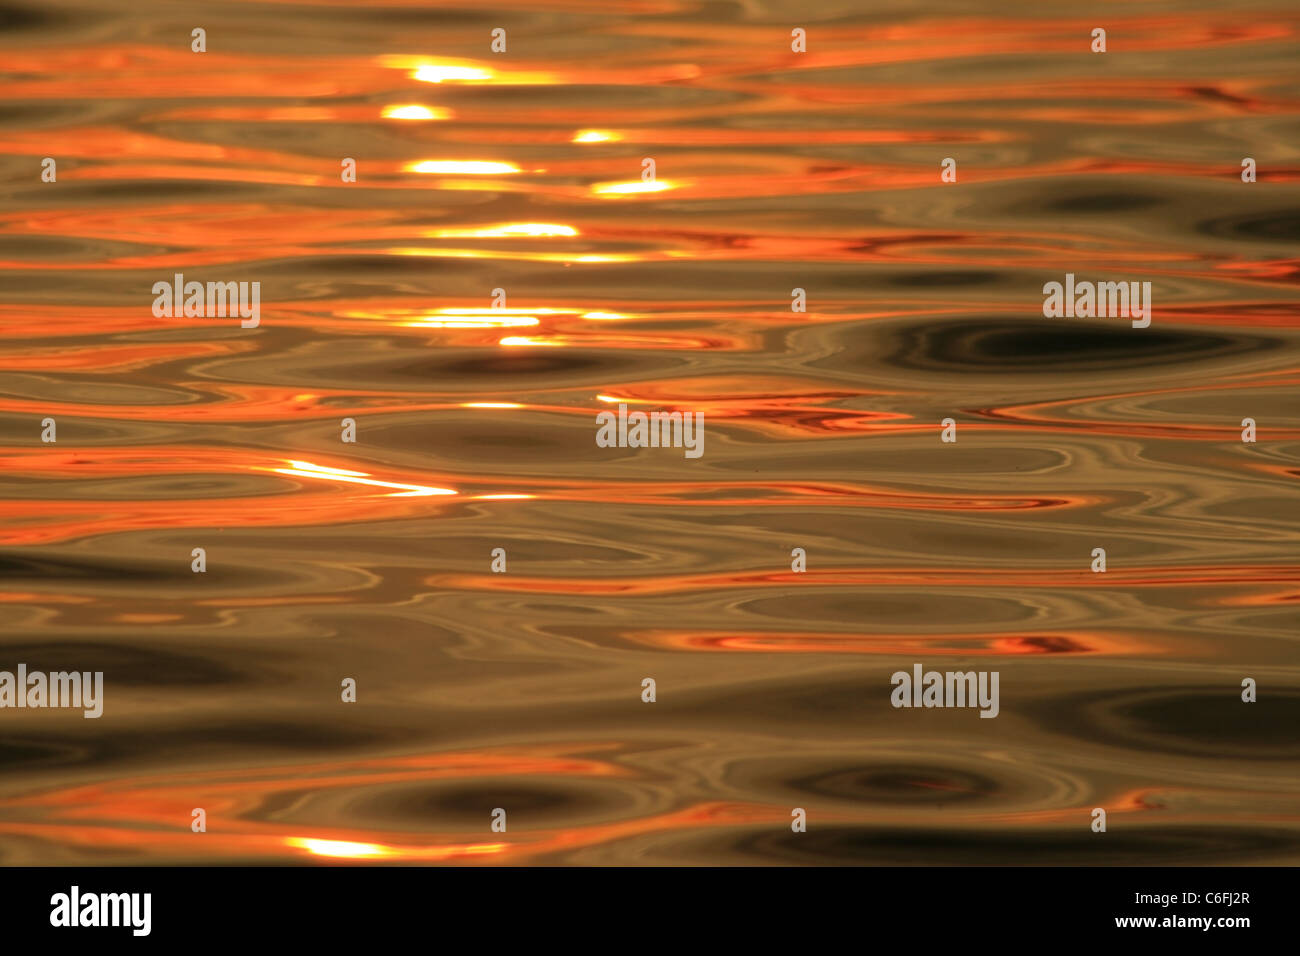 orange sunset reflected on rippling waves in the ocean Stock Photo